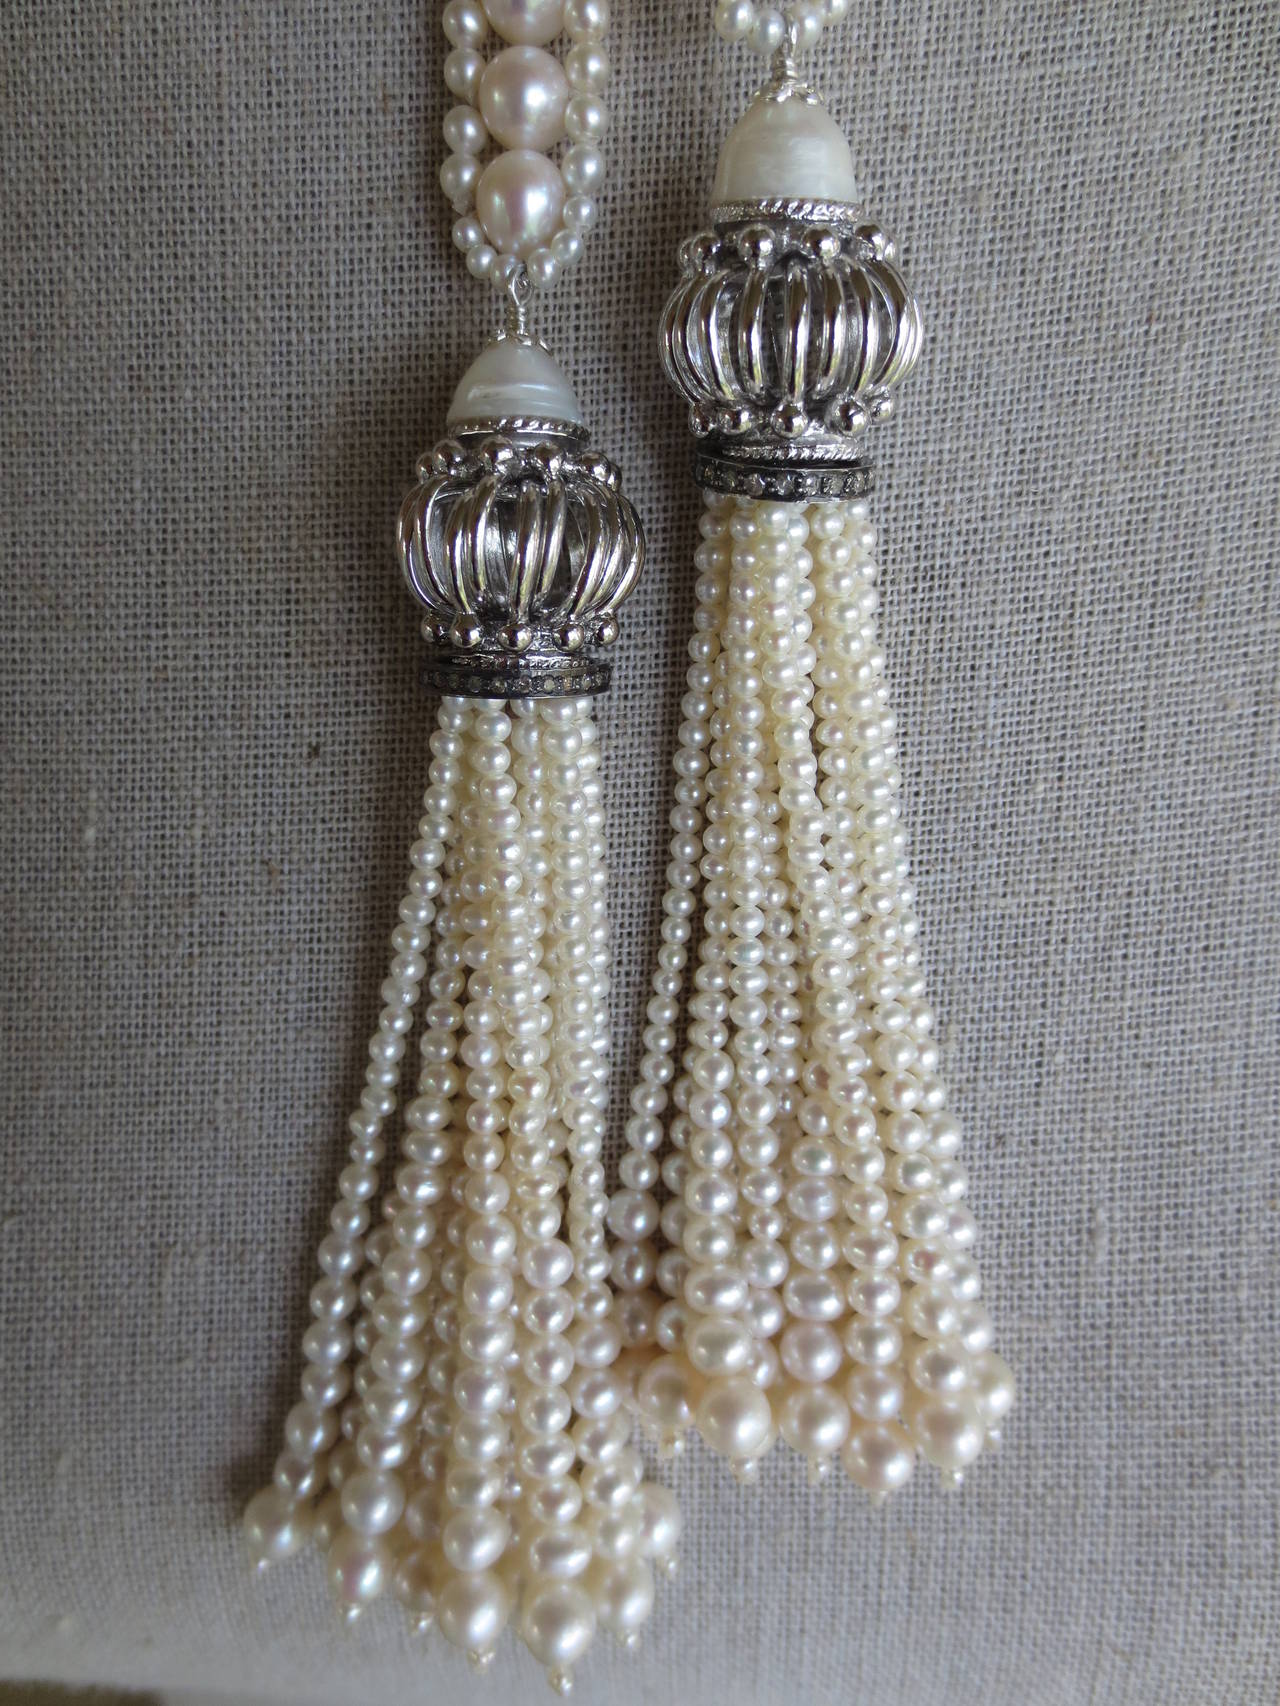 This white pearl sautoir necklace with rhodium plated silver beads and pearl tassels is reminiscent of the art deco style, with its long rope and elegant versatile design. The sautoir is made of handpicked glowing white pearls, ranging from 2 - 6.5